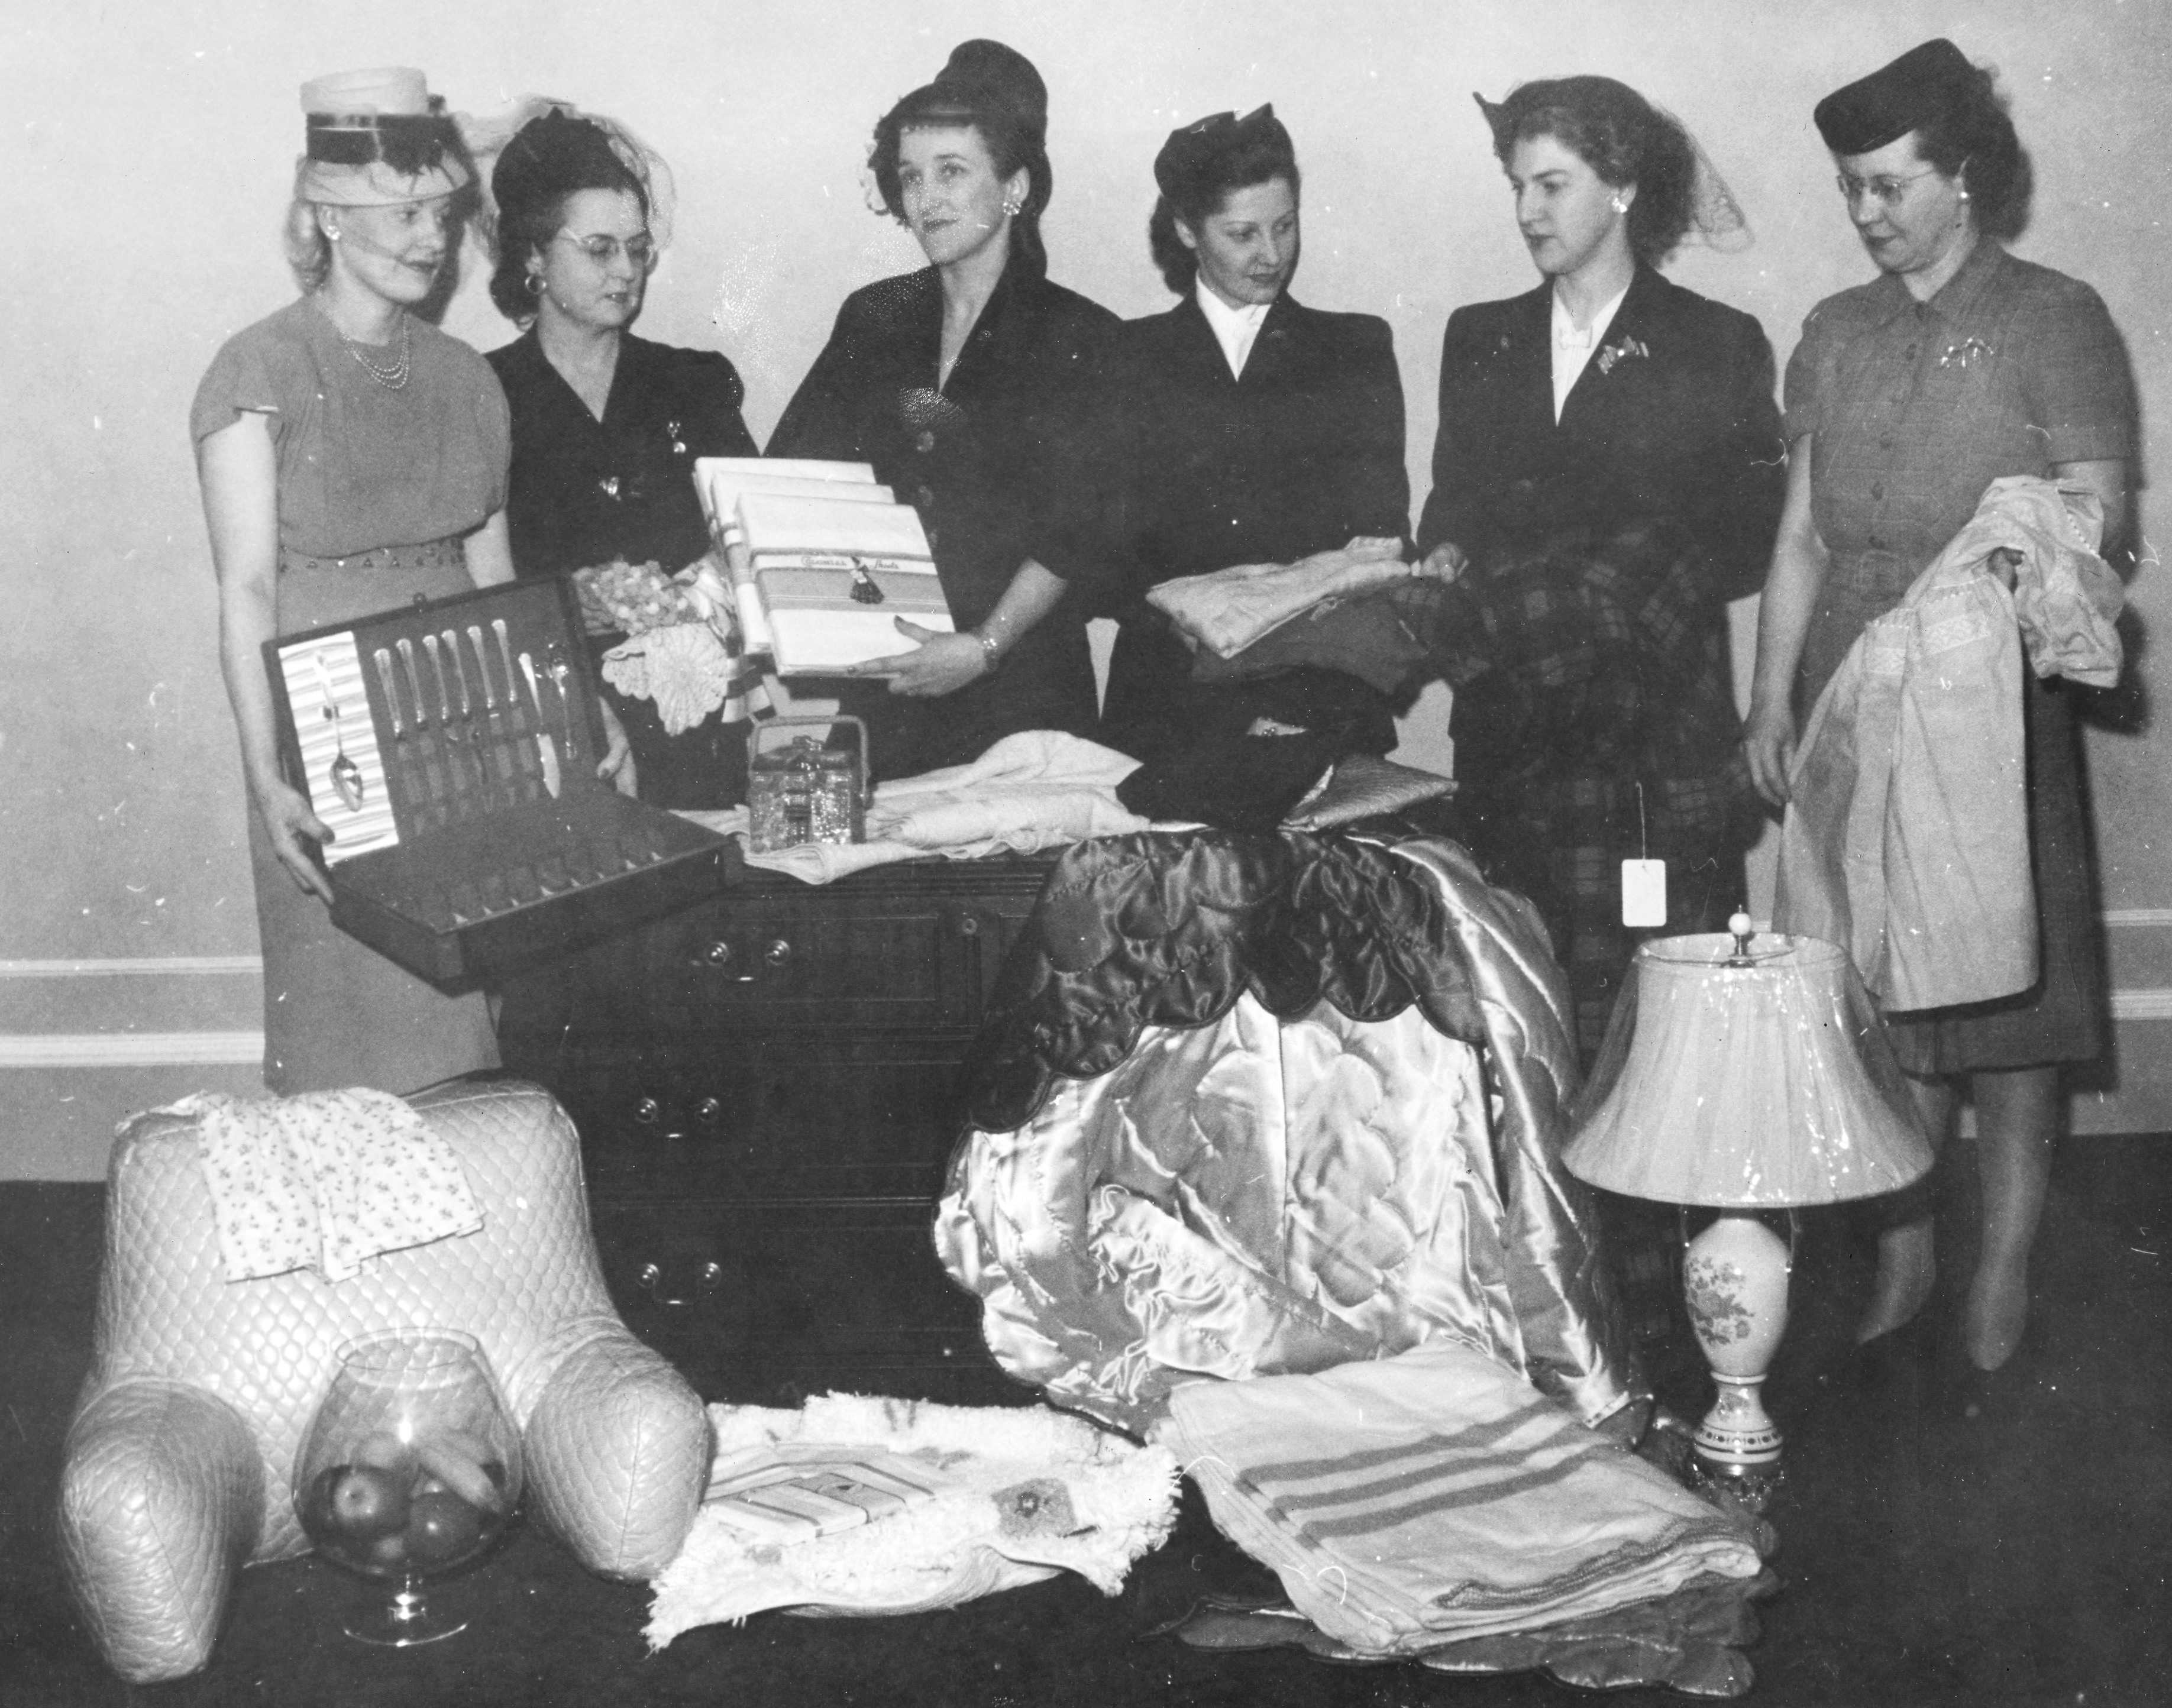 Six women in formal wear stand behind an arrangement of domestic goods in a black and white photo.